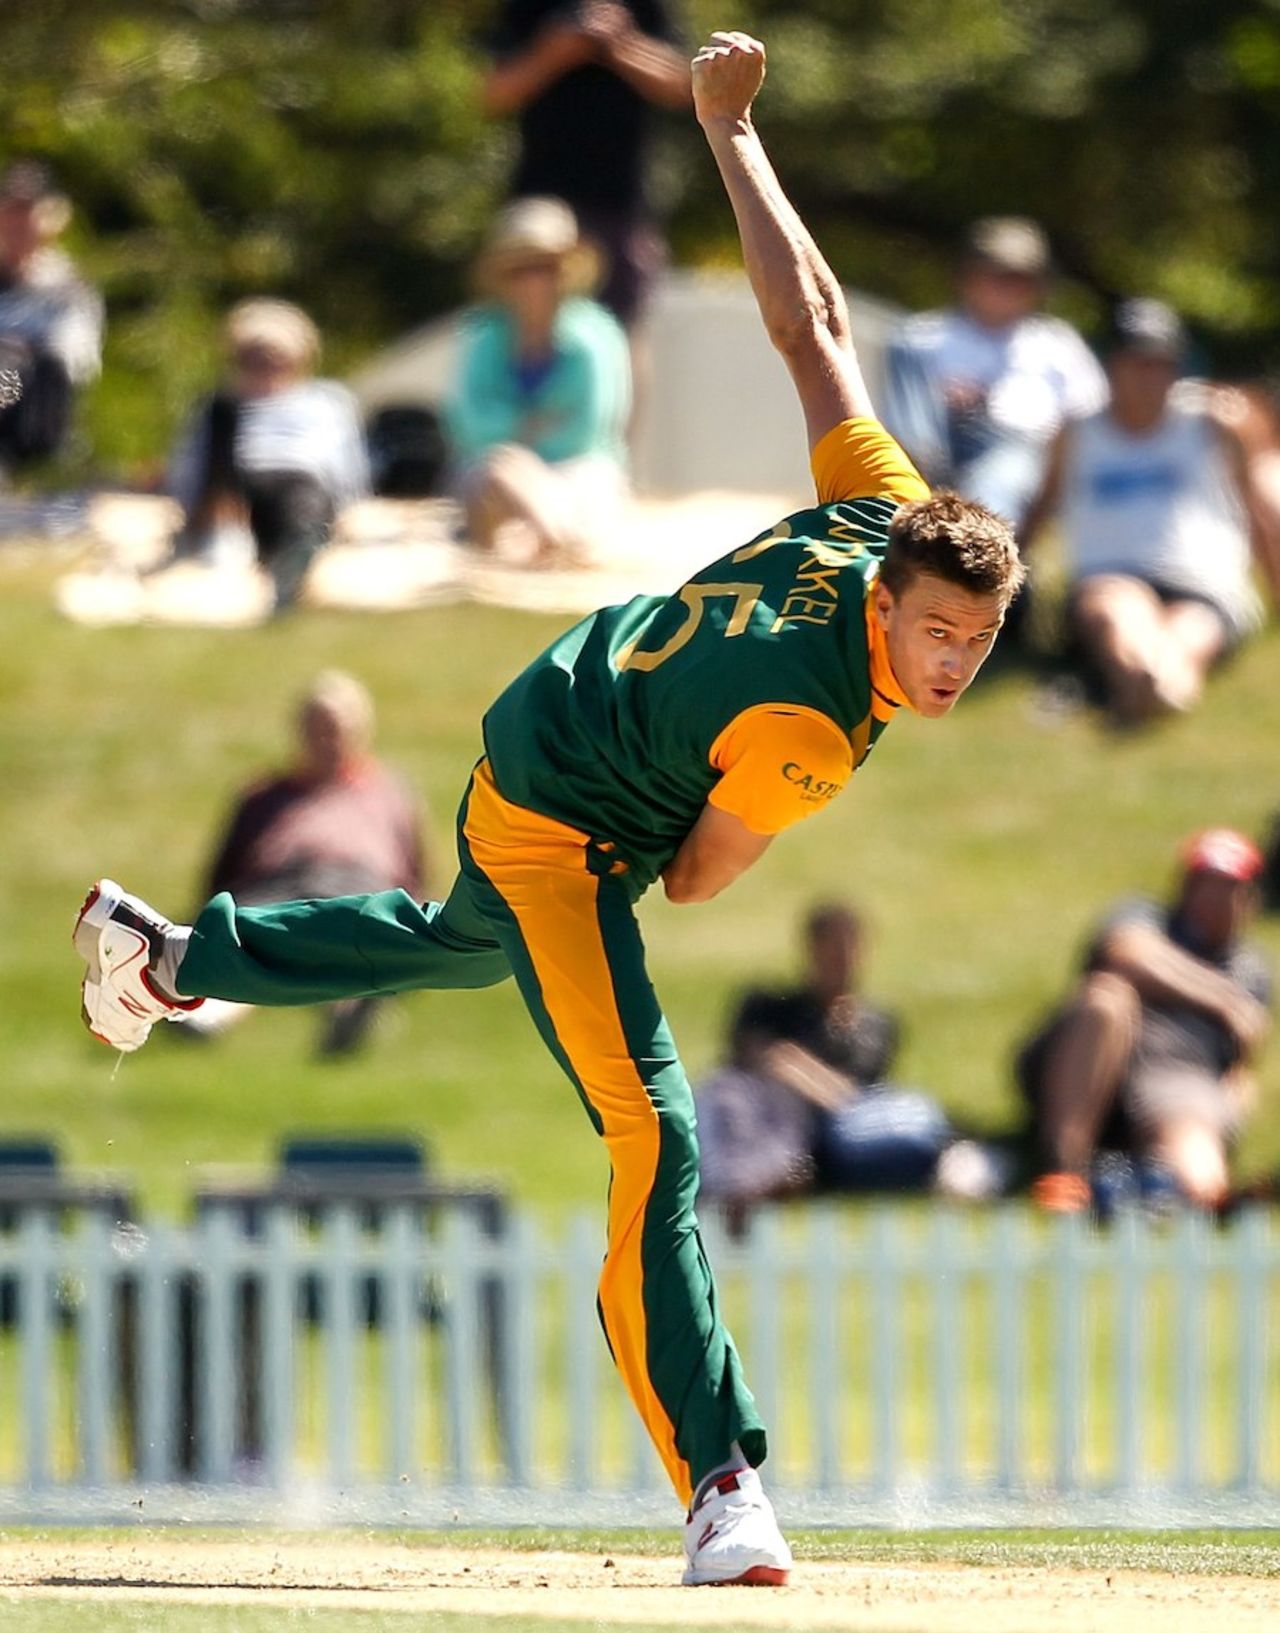 Morne Morkel in action at Hagley Oval, New Zealand v South Africa, World Cup warm-up match, Christchurch, February 11, 2015